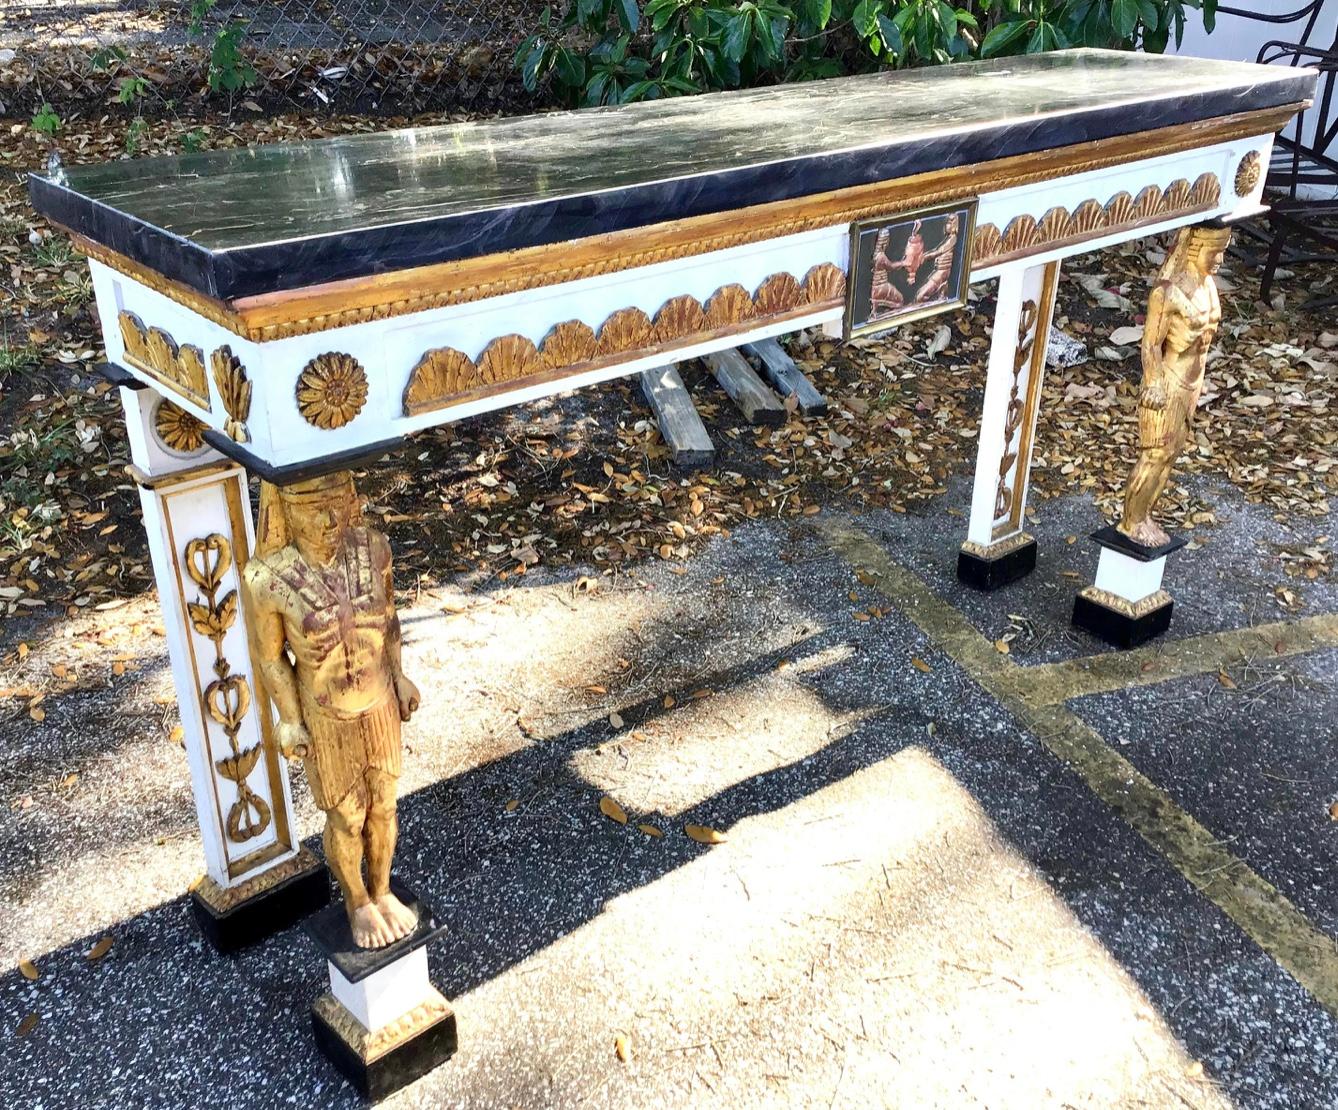 A large and impressive Egyptian Revival console table. Black portoro marble top. Frieze carved with gilt decorated fans and rosettes. Central medallion with gilt and framed Egyptian scene. The legs in the shape of standing gilt Sphinxes. A large and